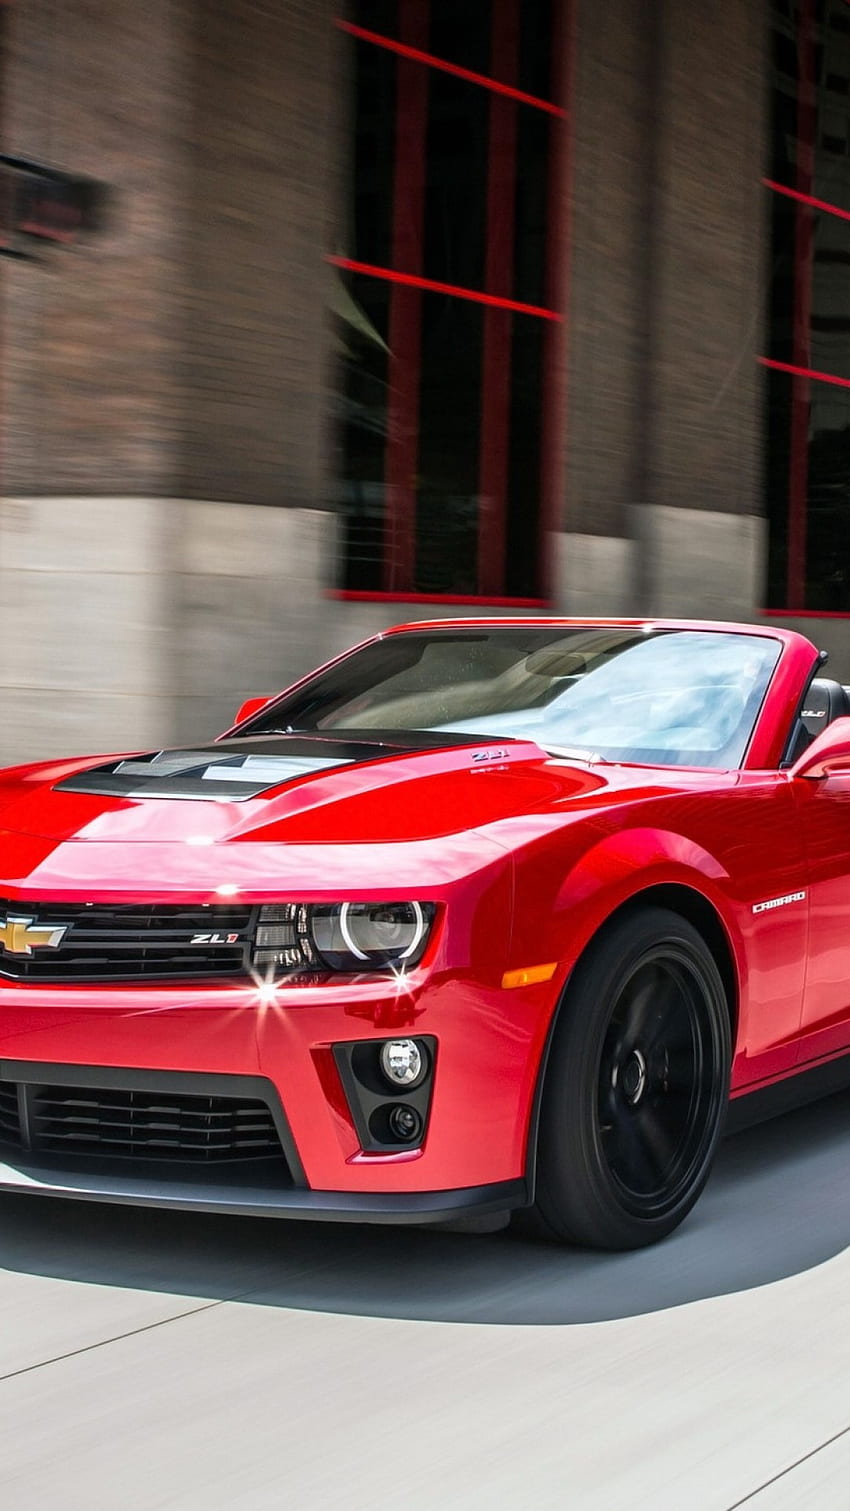 Chevrolet Camaro Zl1, Red, Convertible Muscle Cars for iPhone 8, iPhone 7 Plus, iPhone 6+, Sony Xperia Z, HTC One - Maiden HD phone wallpaper